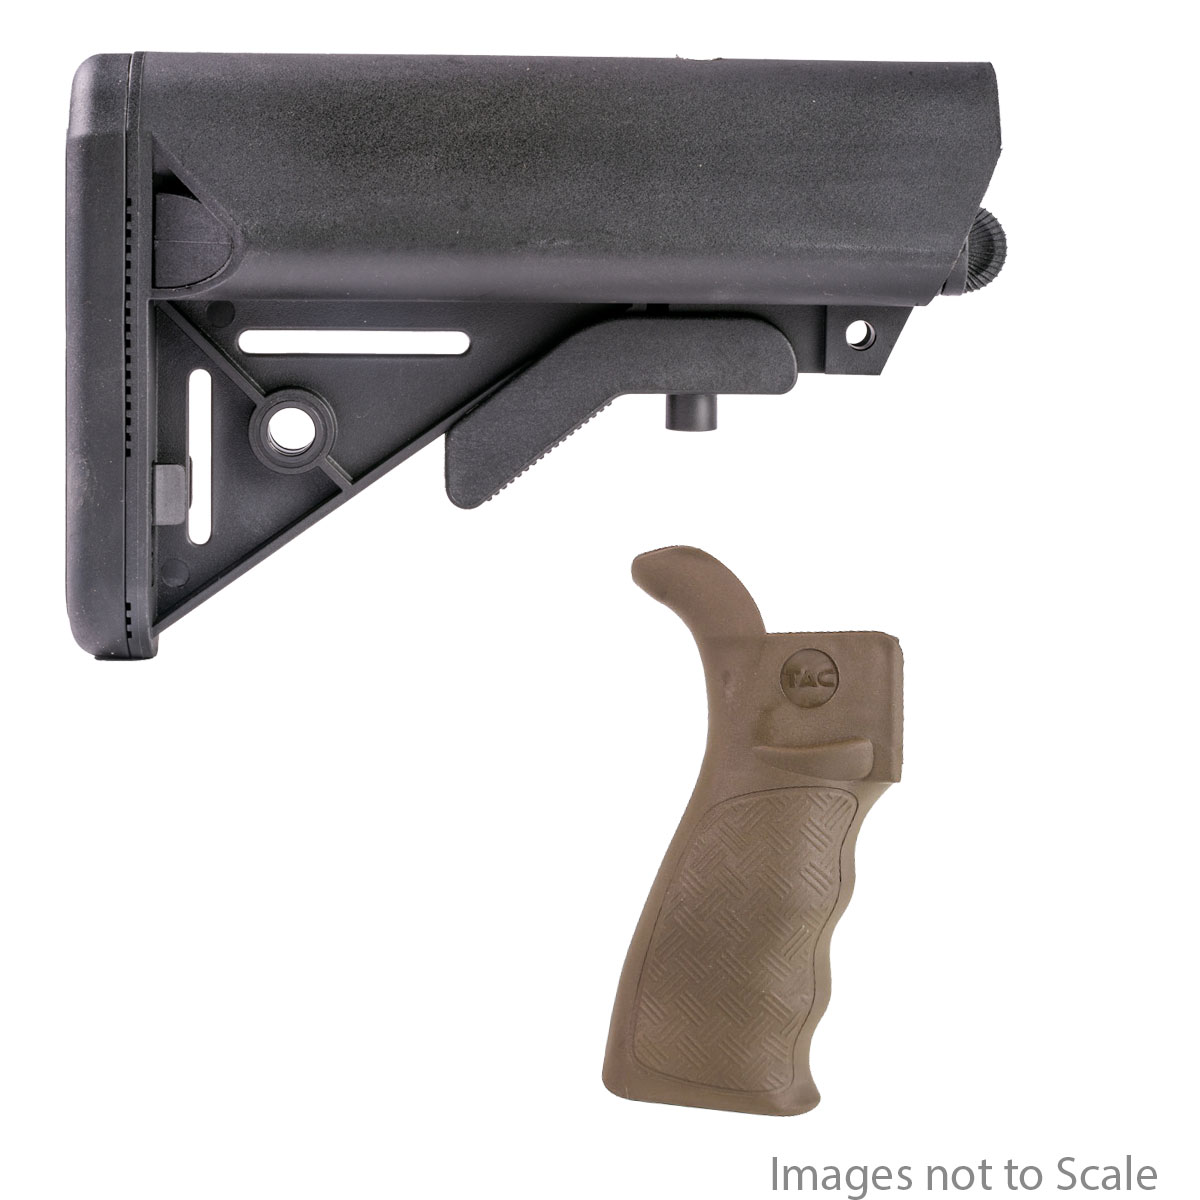 Furniture Upgrade Kit: Team Accessories Corp Over Molded Pistol Grip, Olive Drab + Gauntlet Arms SOPMOD Style Collapsible Stock with Storage Compartments